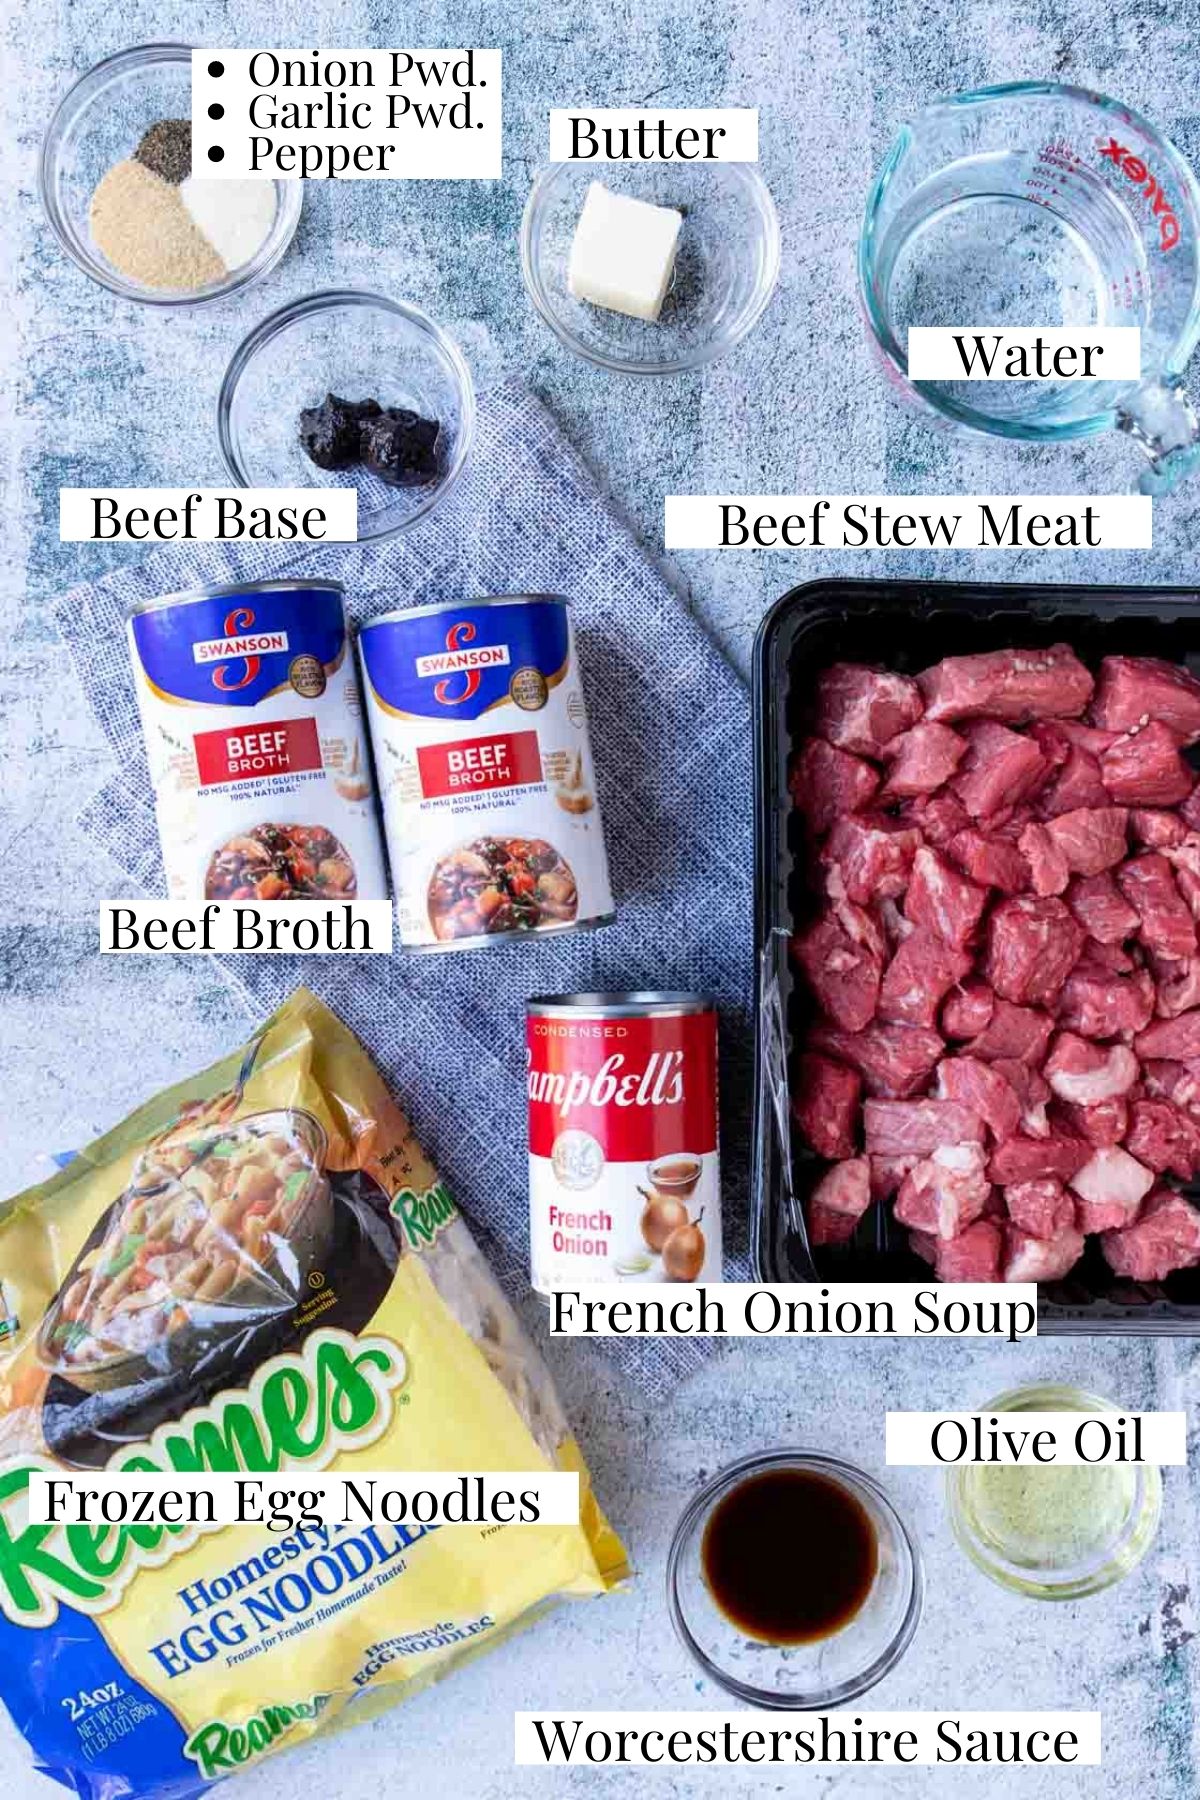 Ingredients for Beef and Noodles in the Instant Pot